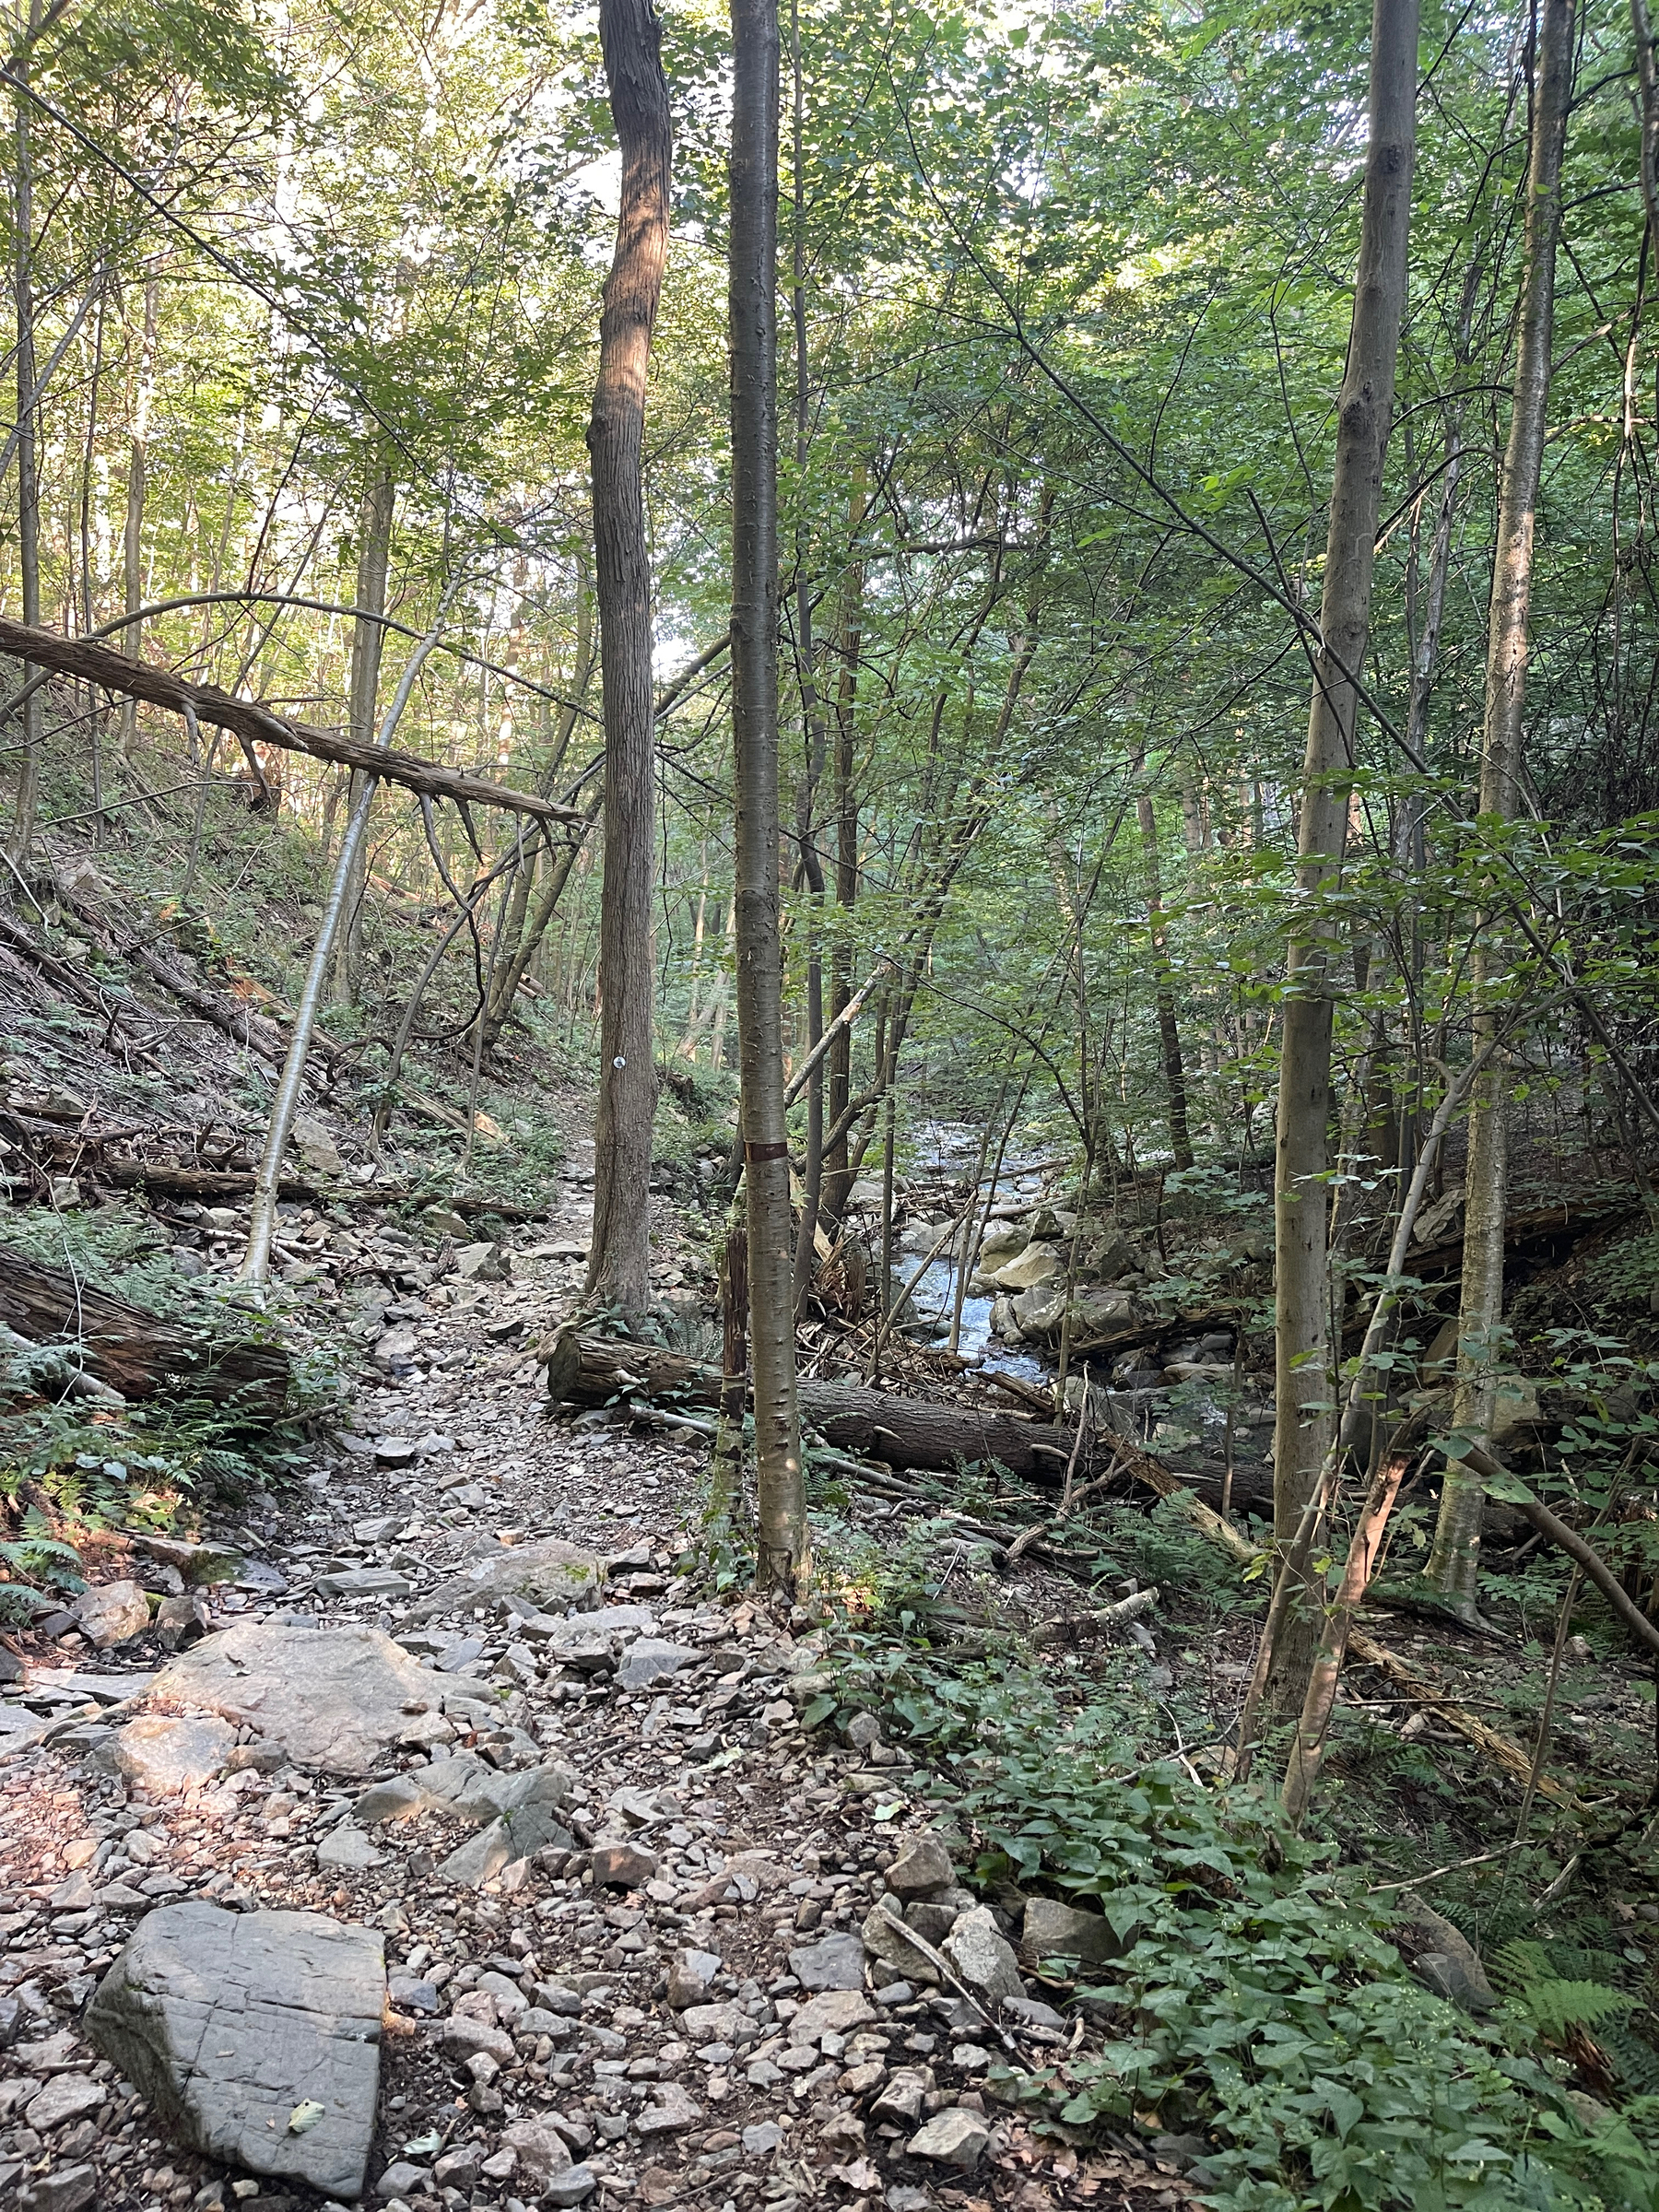 Trail and stream in a forest.